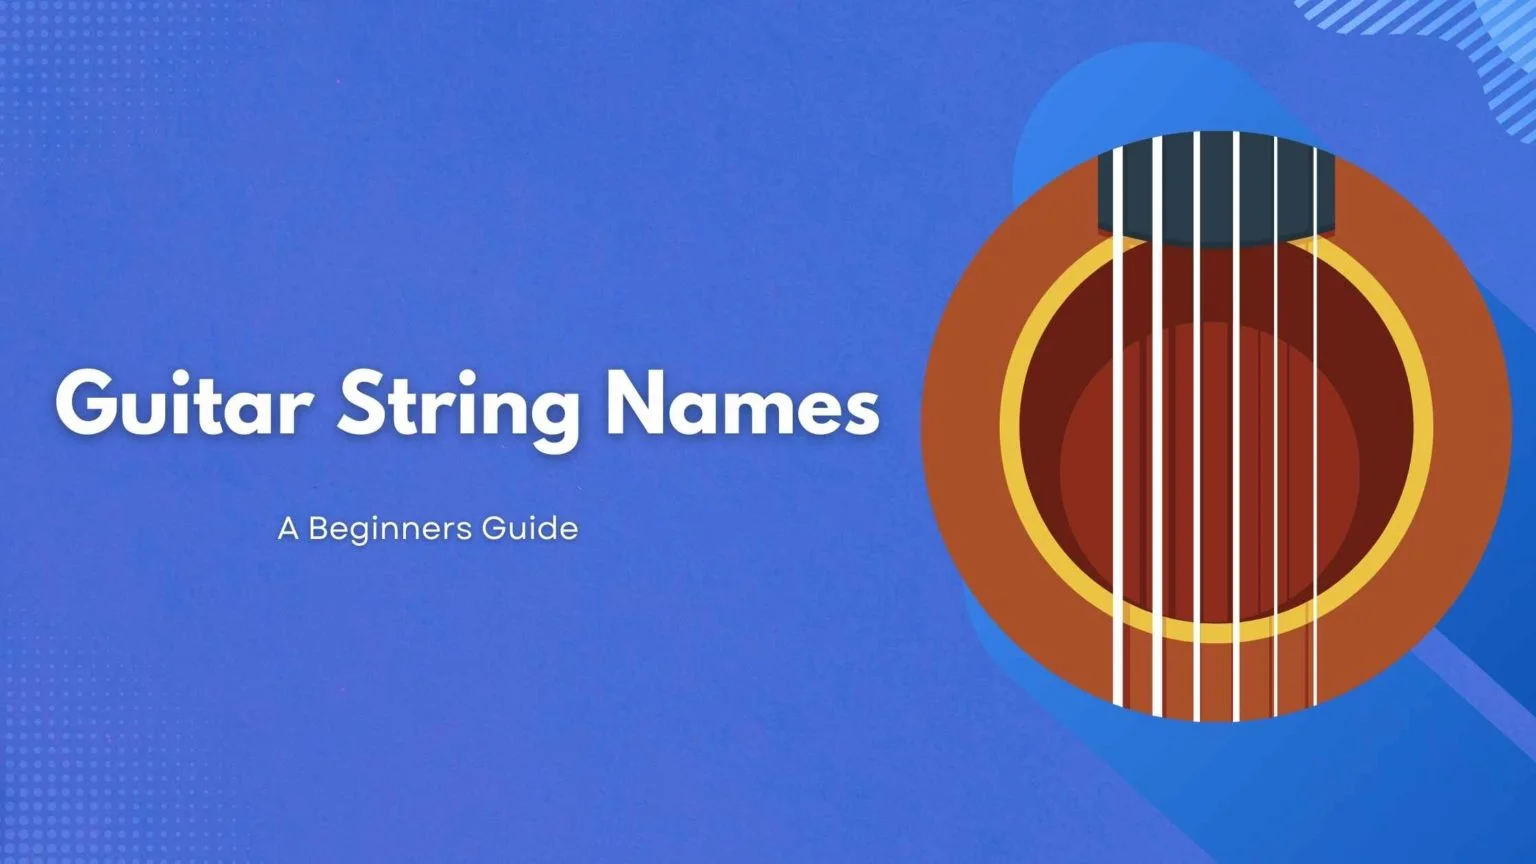 How to remember Guitar strings names